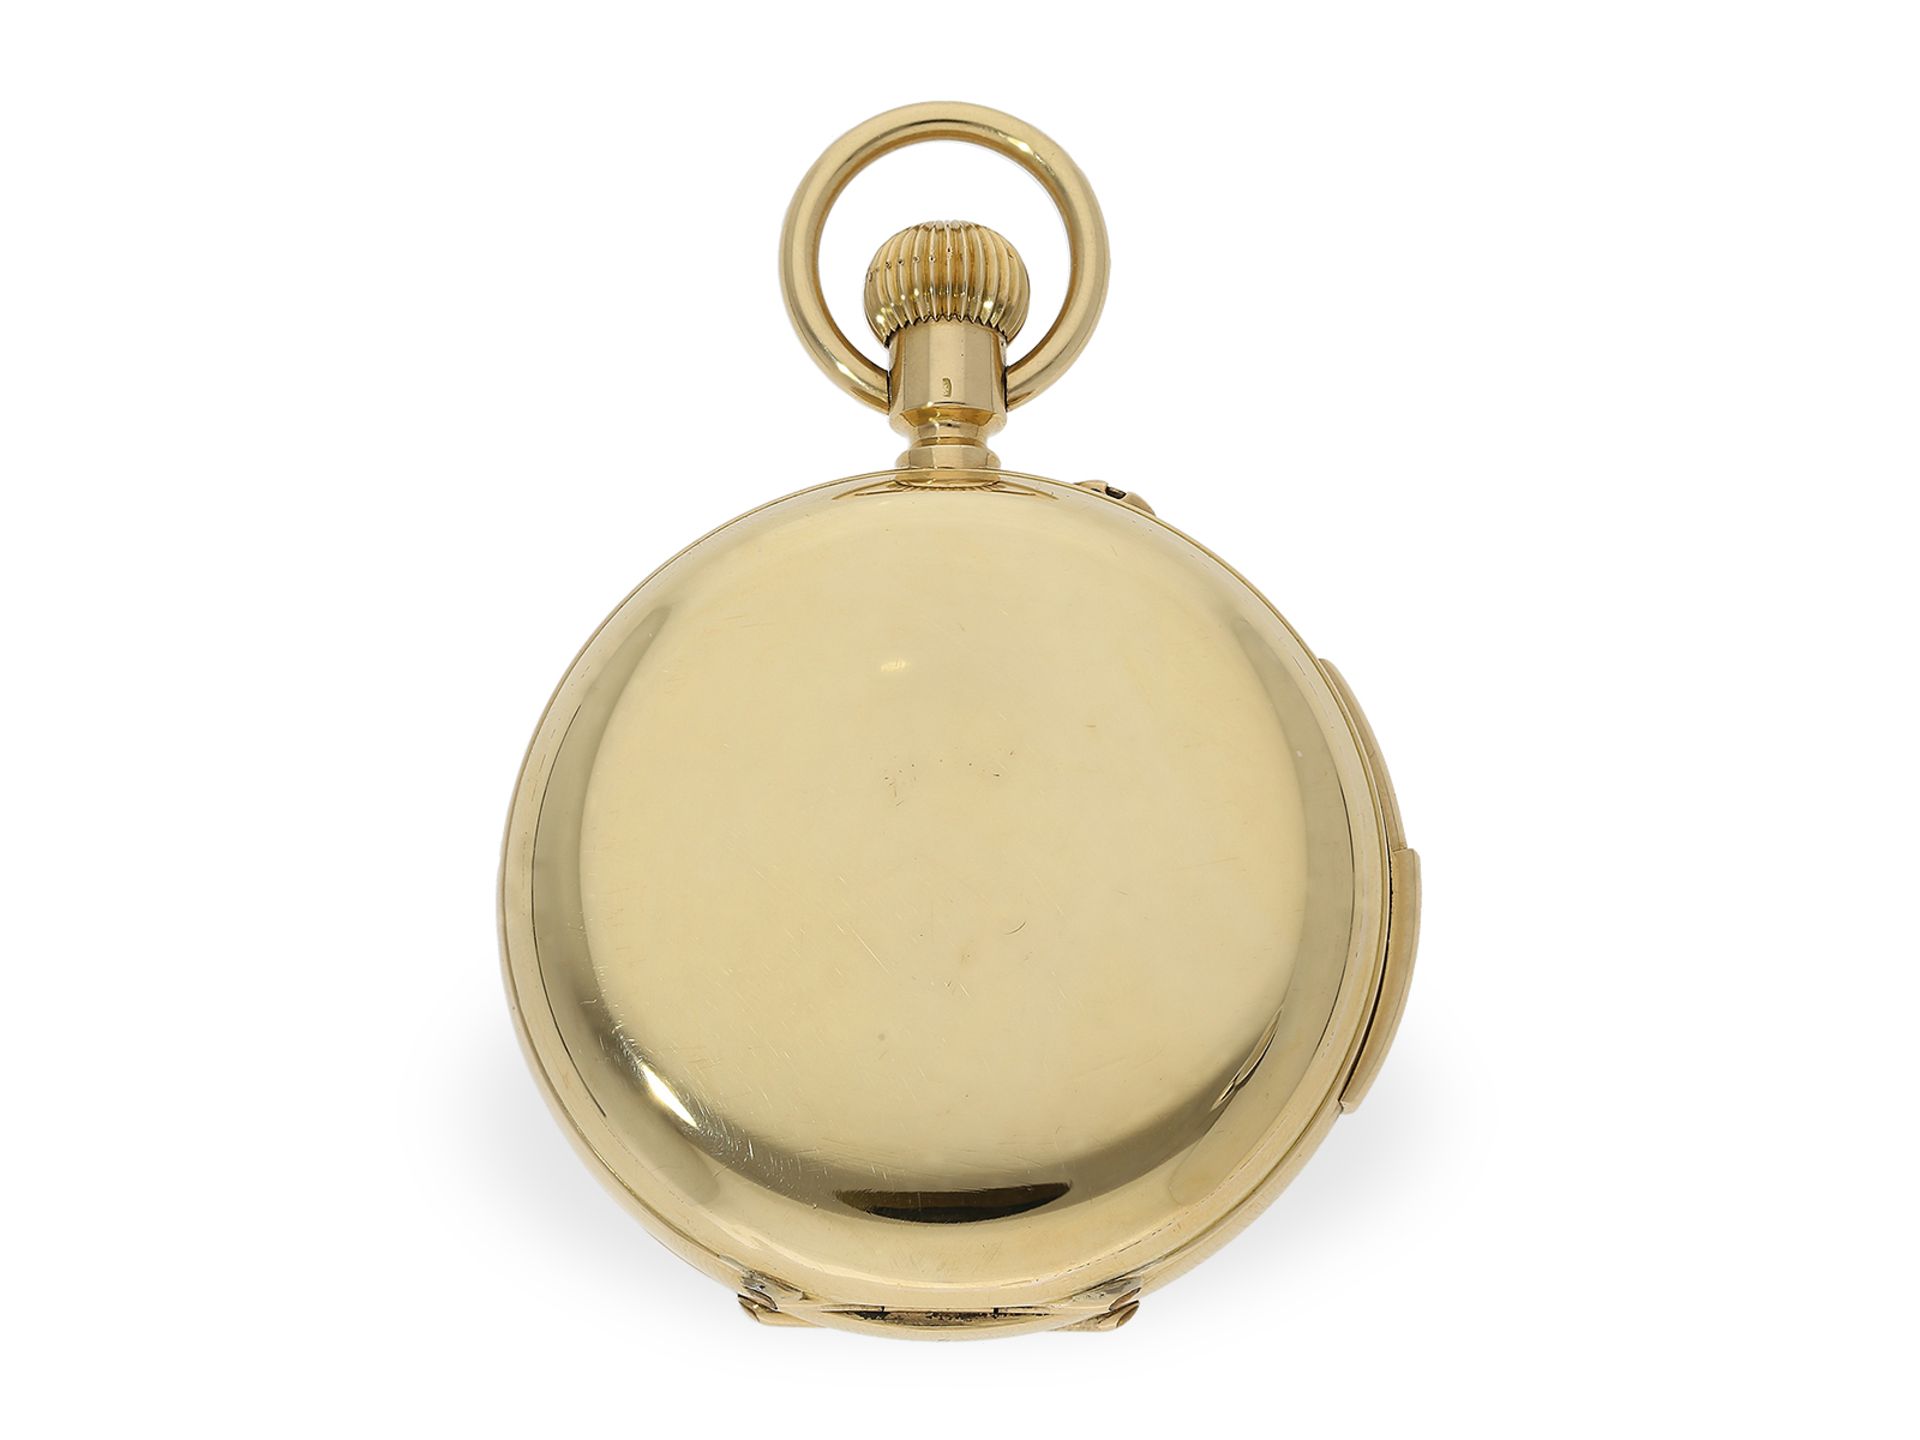 Pocket watch: heavy gold hunting case watch with minute repeater, Le Roy London No.1371 - Image 7 of 7